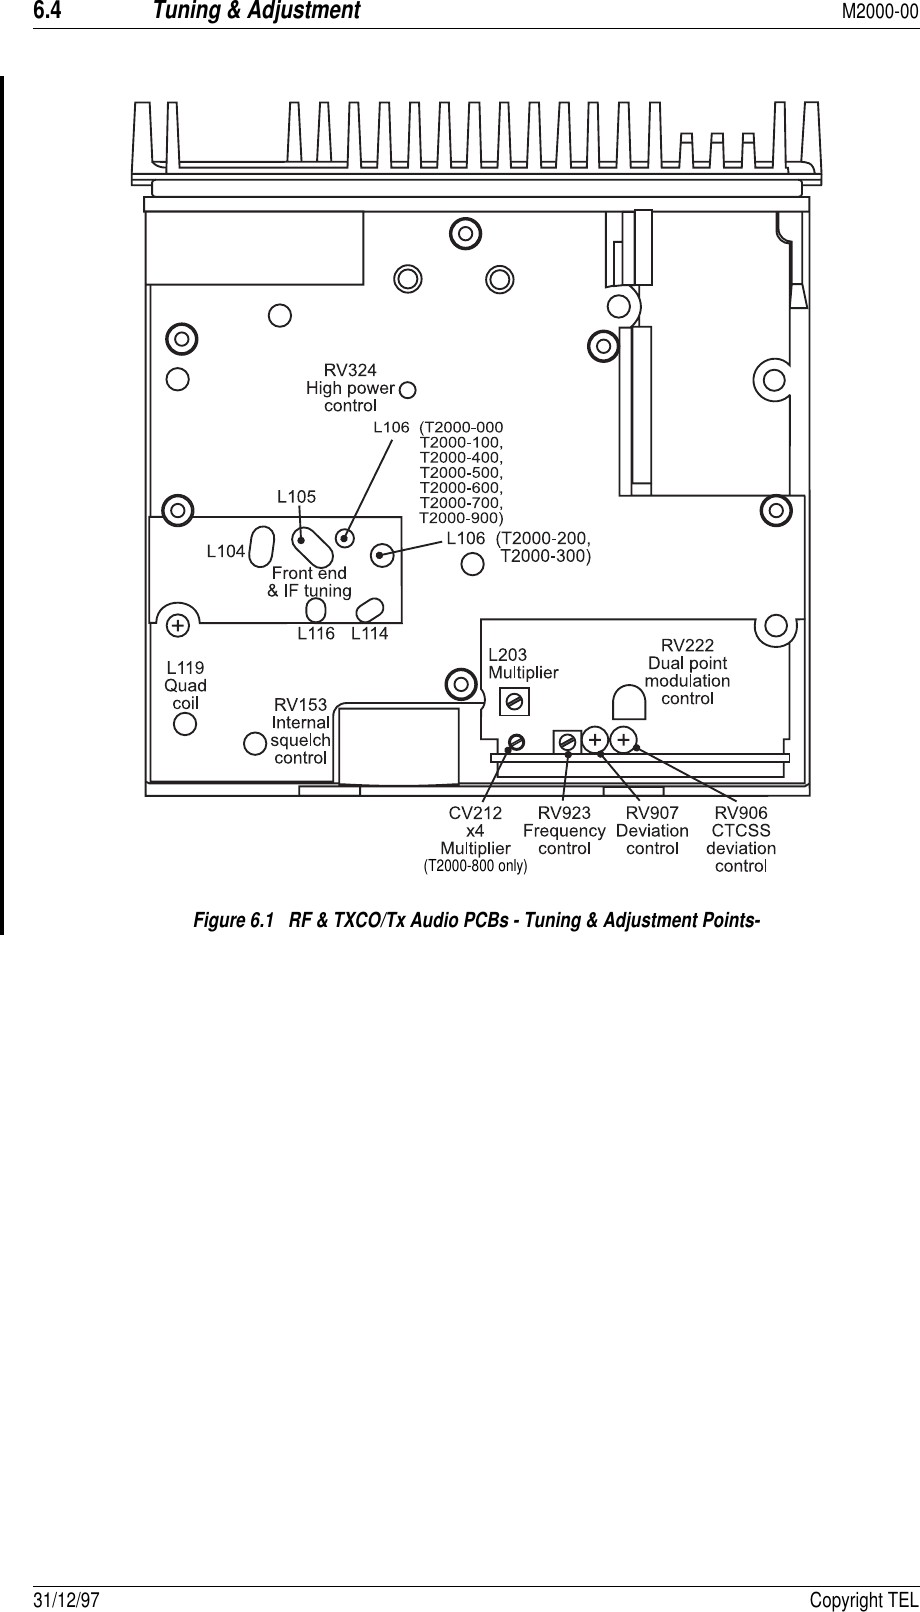 Page 46 of 2000 4231 Mobile Transceiver User Manual current version of the Tait Limited